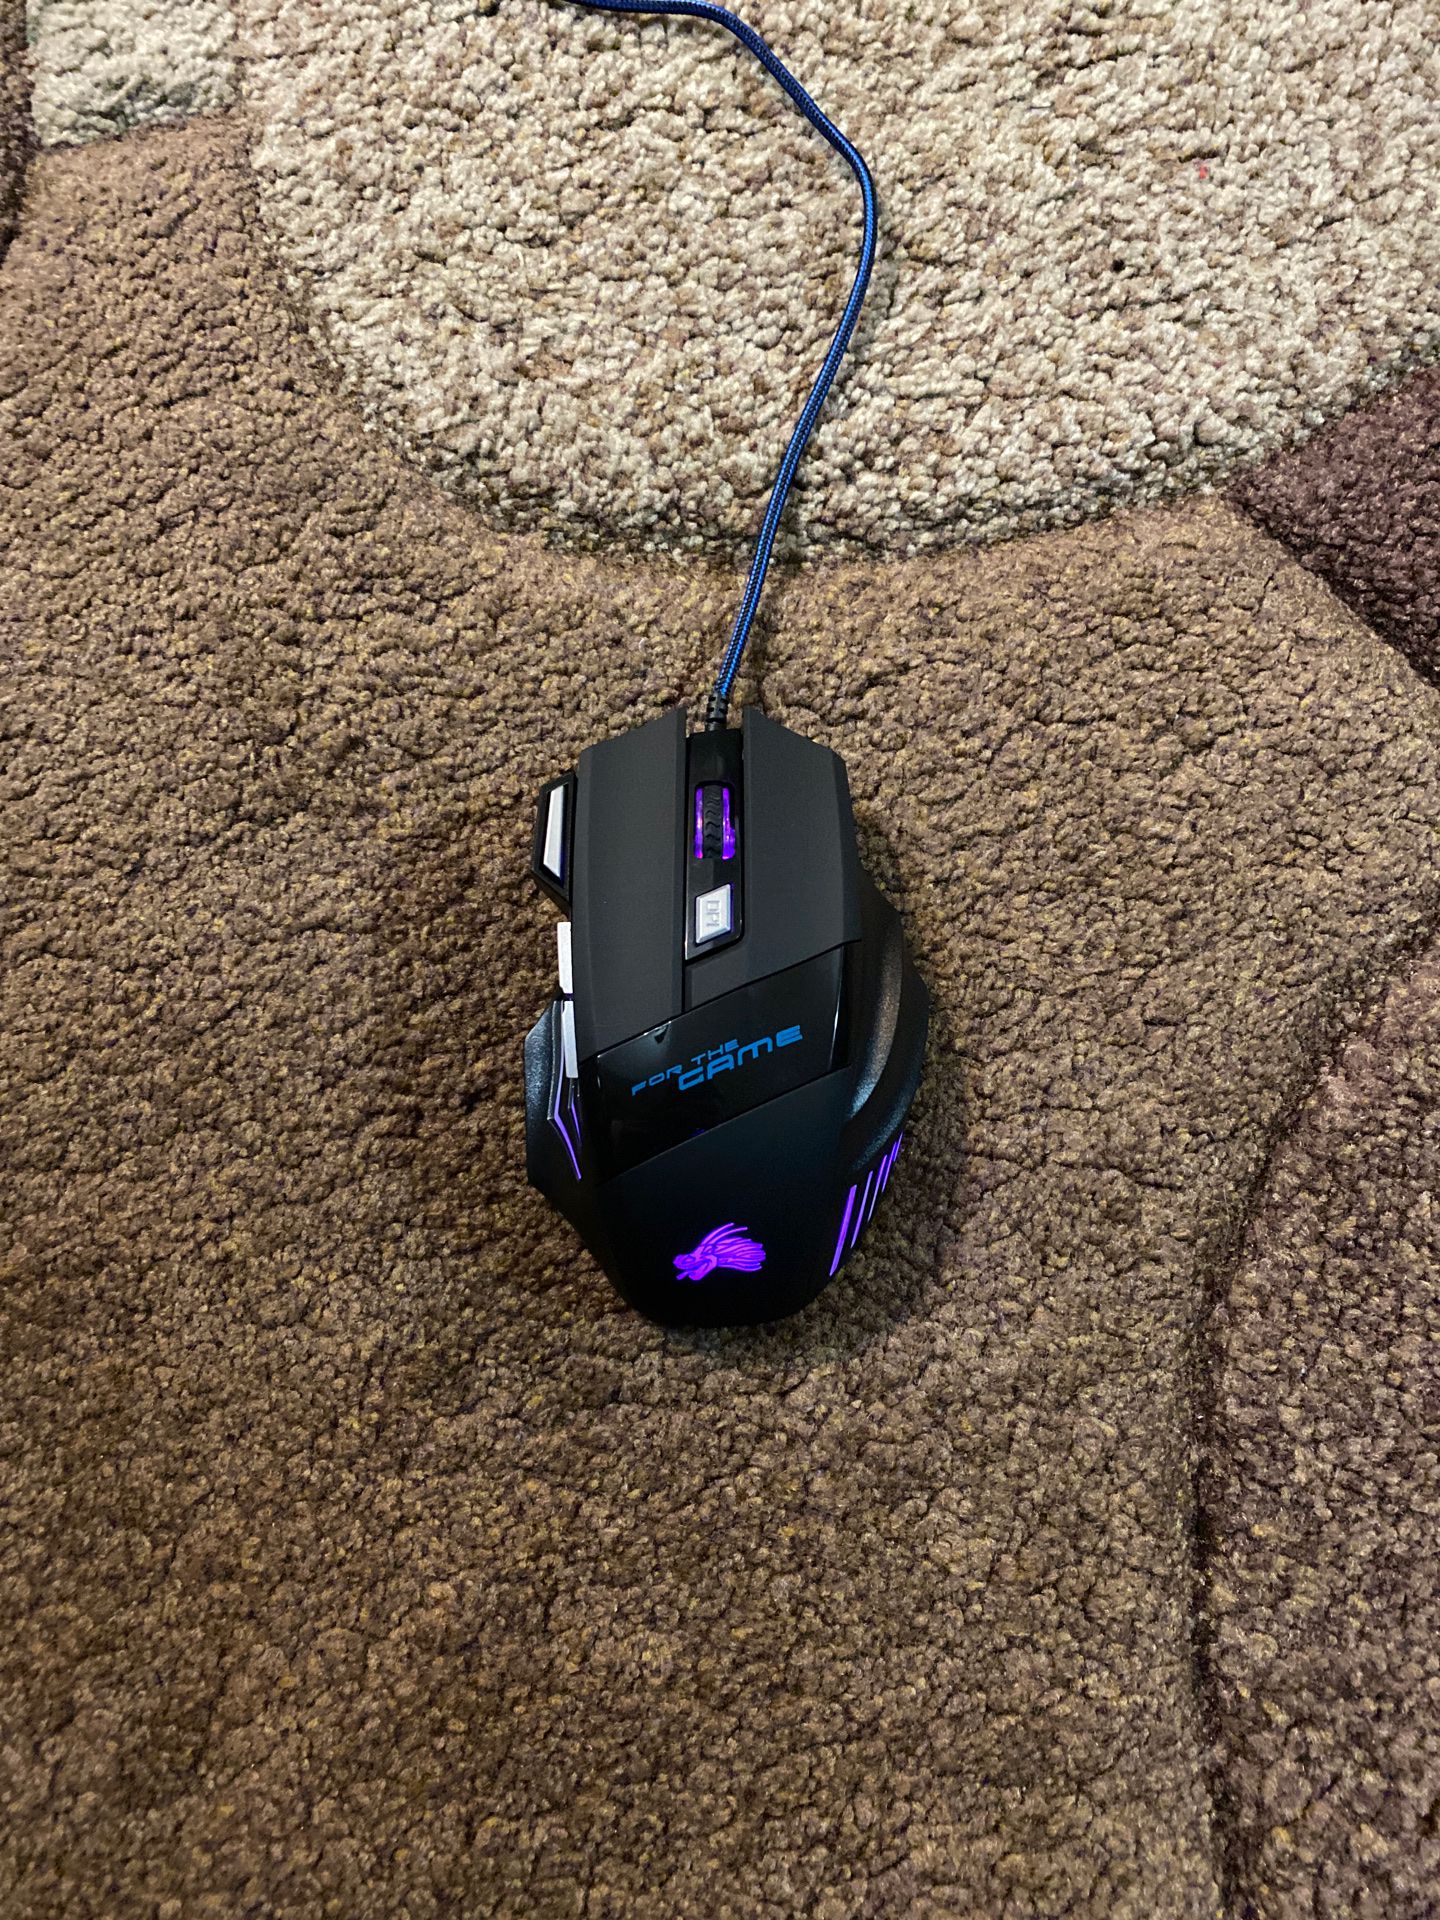 Gaming computer mouse